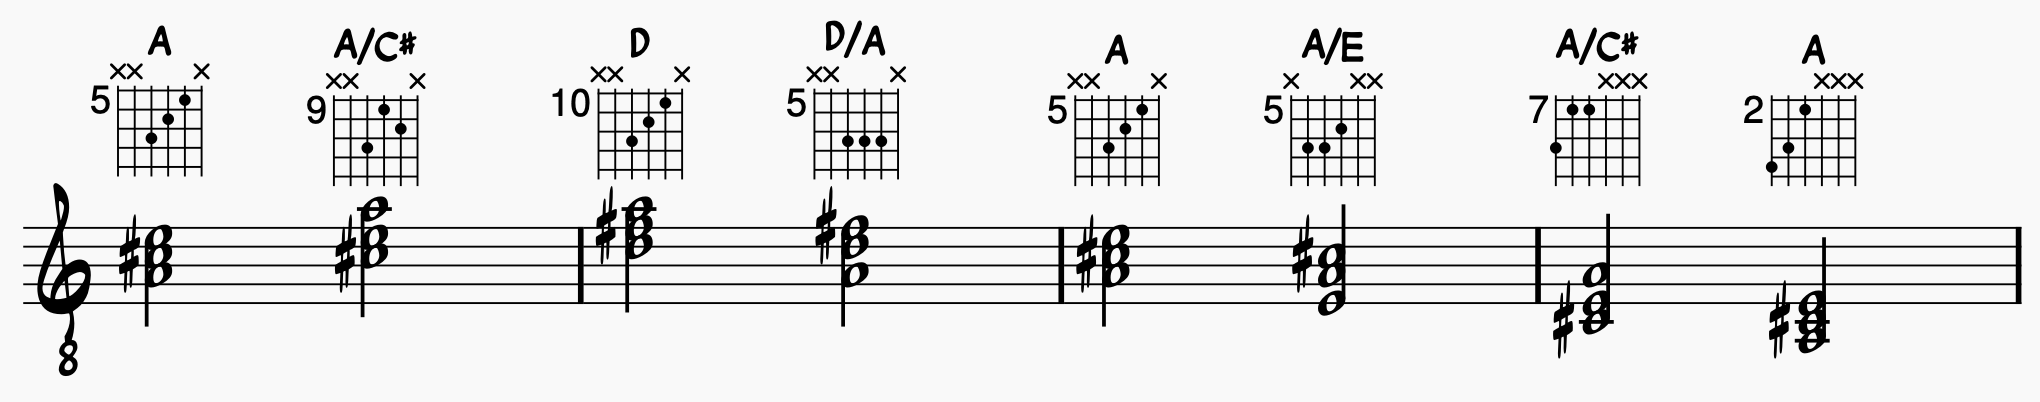 Using major triads to harmonize a blues in A 